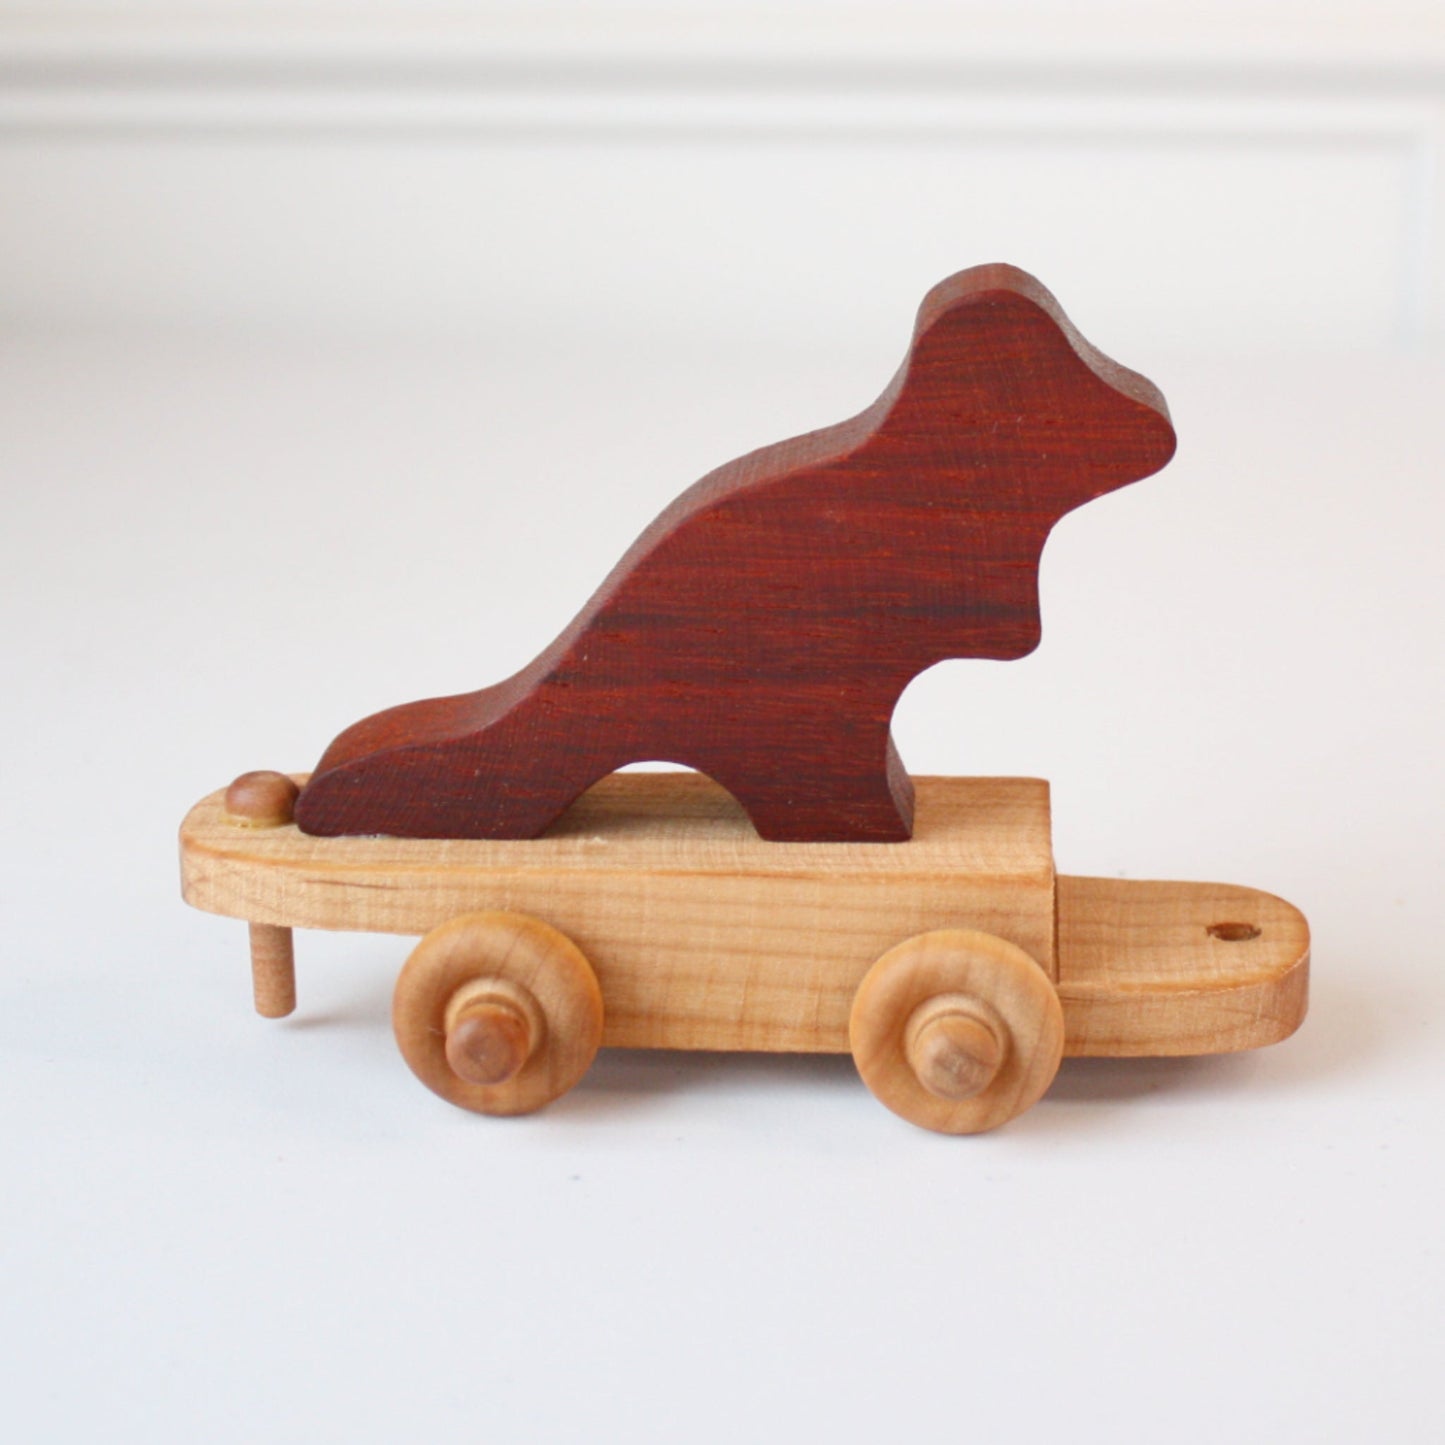 Wooden Toy Zoo Train Set - Made in the USA